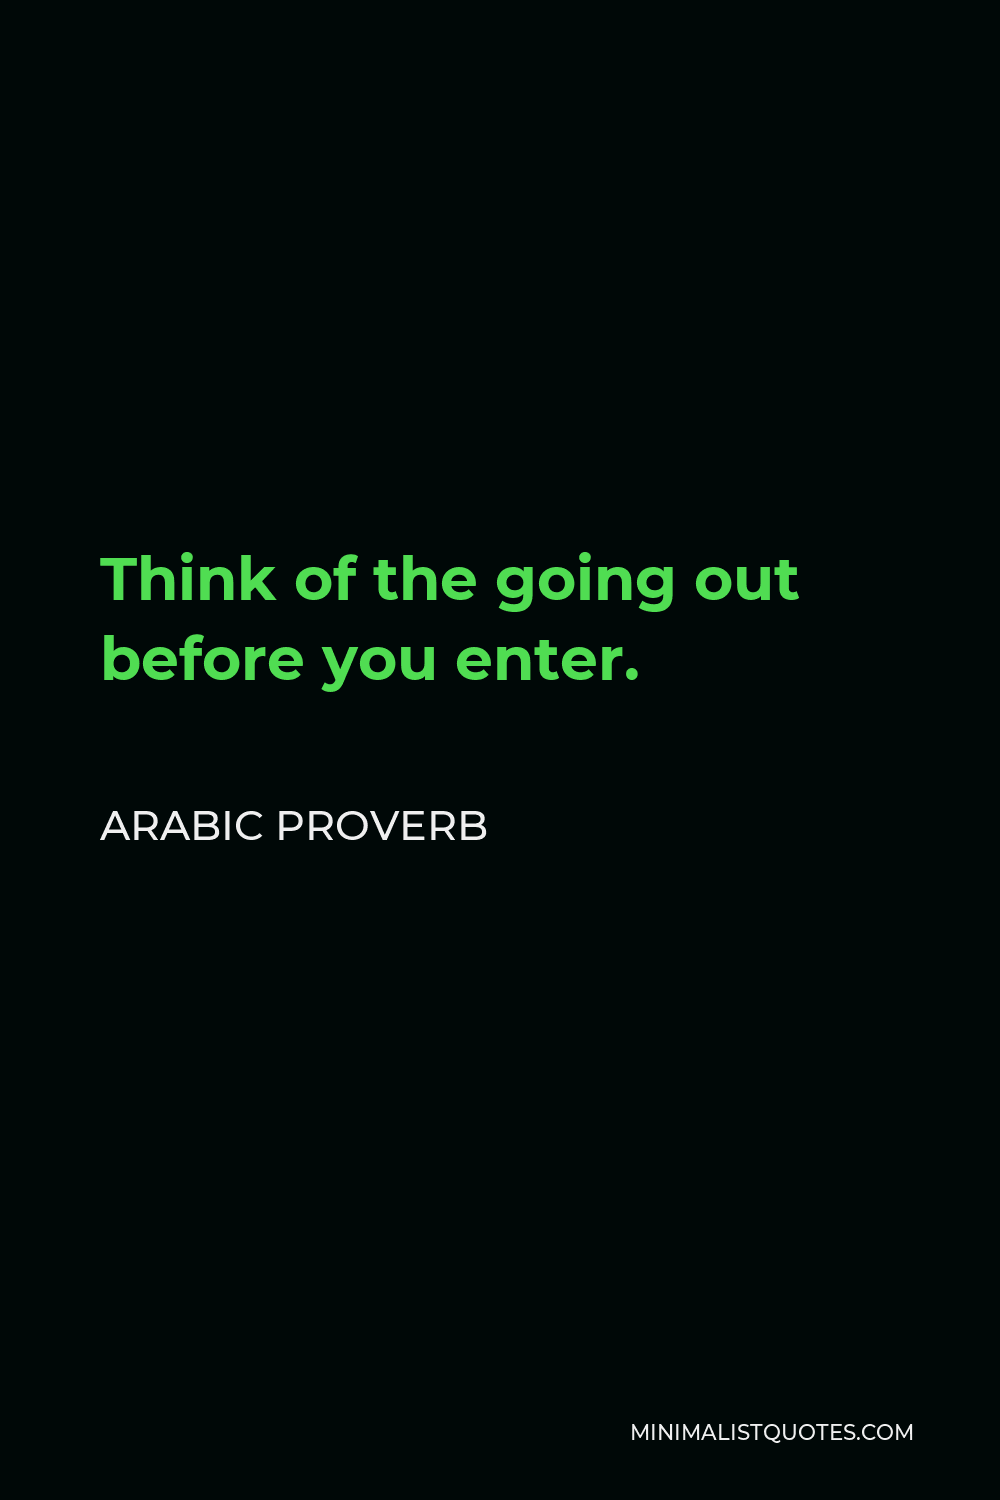 Arabic Proverb Quote - Think of the going out before you enter.